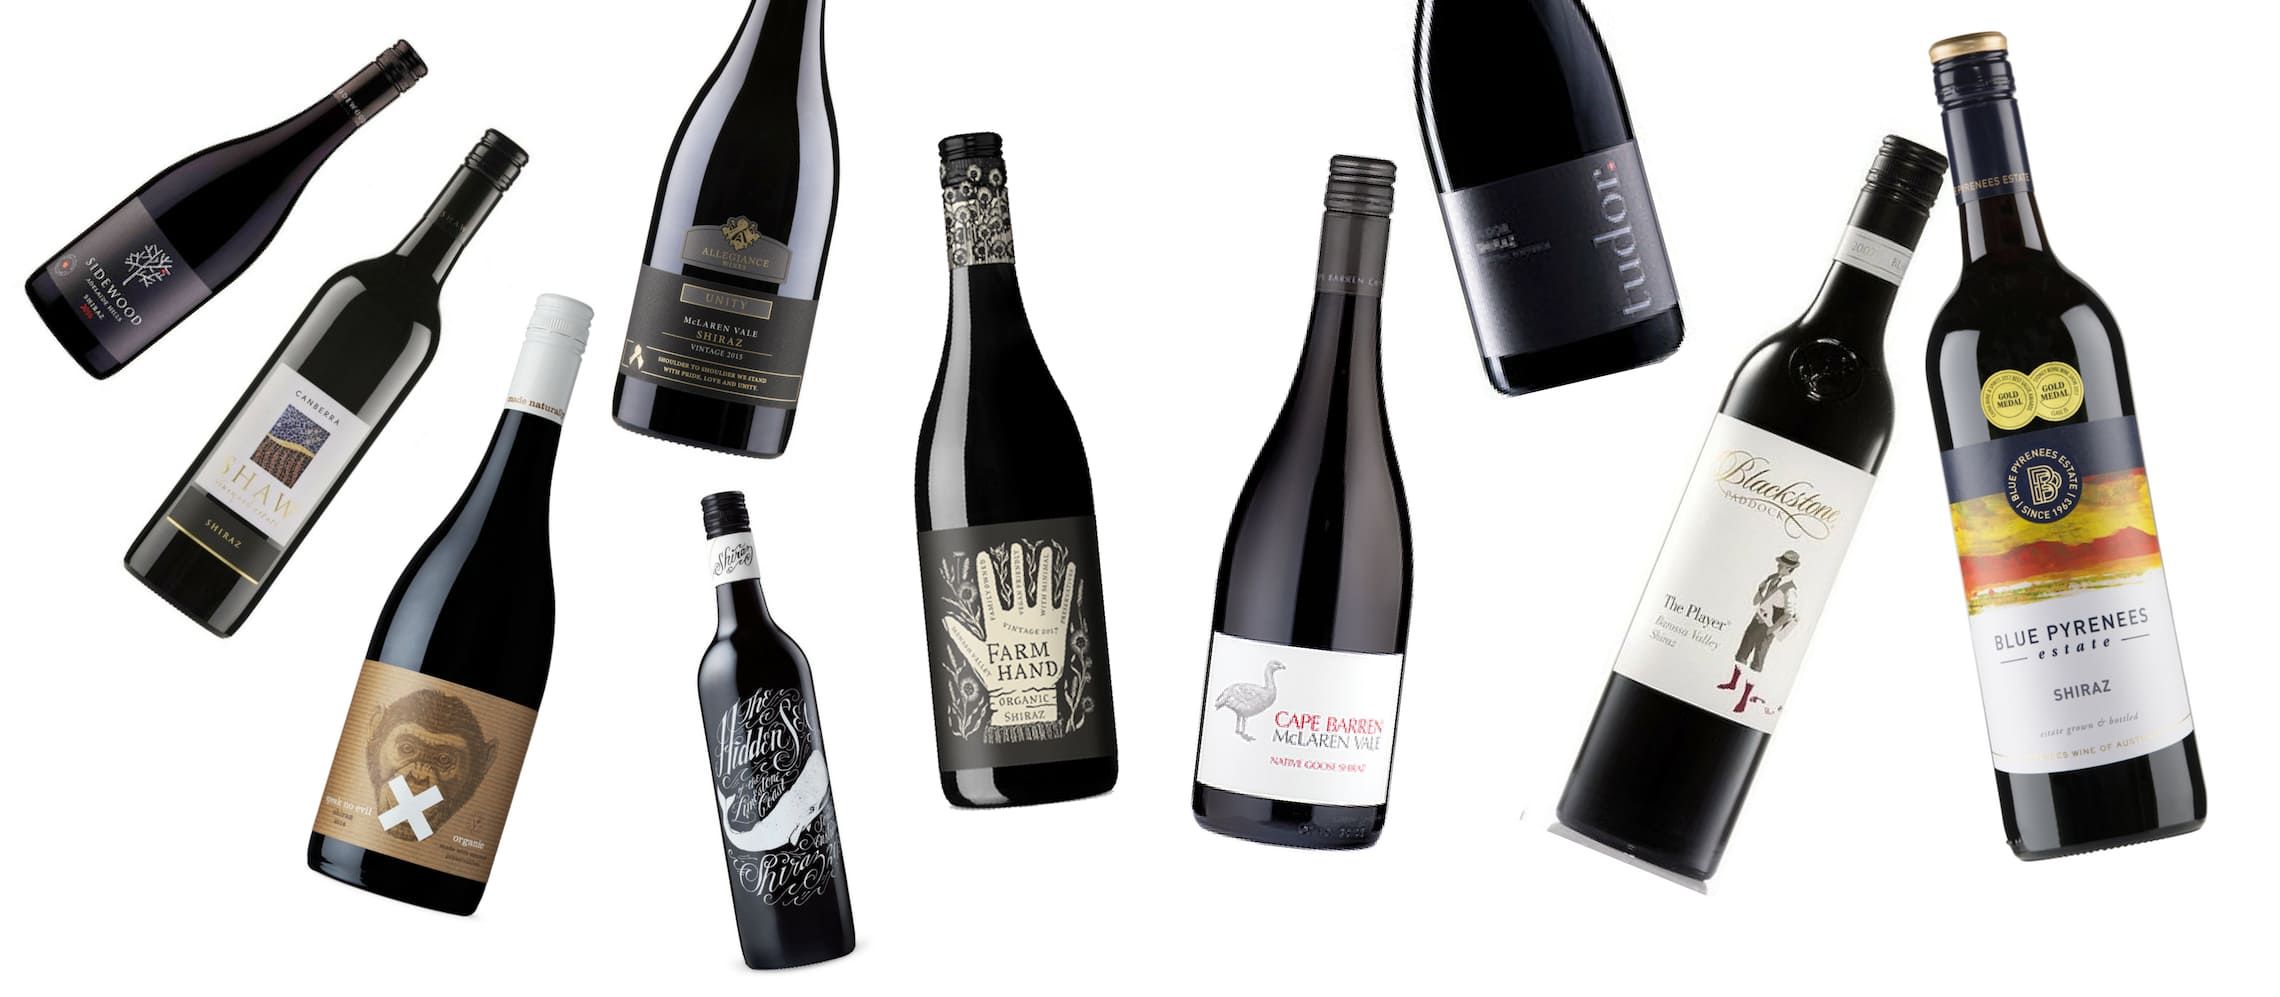 Photo for: Top 10 Shiraz to Try in Australia